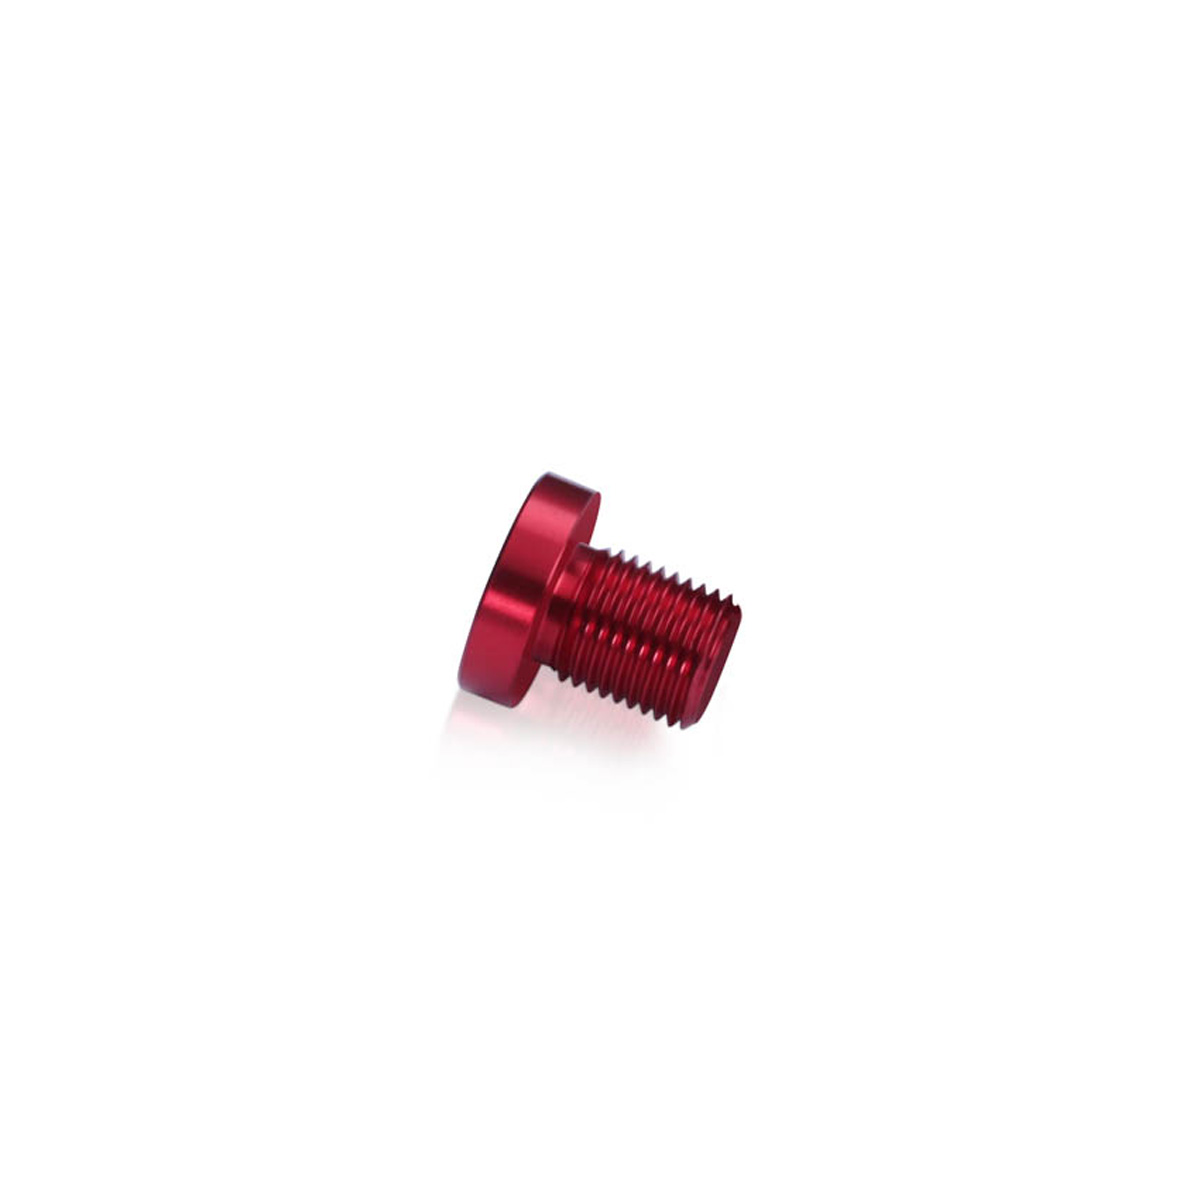 AS16-12RD Head replacement for Mbs-Standoffs 5/8'' Diameter x 1/2'' Barrel Length, Aluminum Chery Red Finish Standoffs (No Washer).